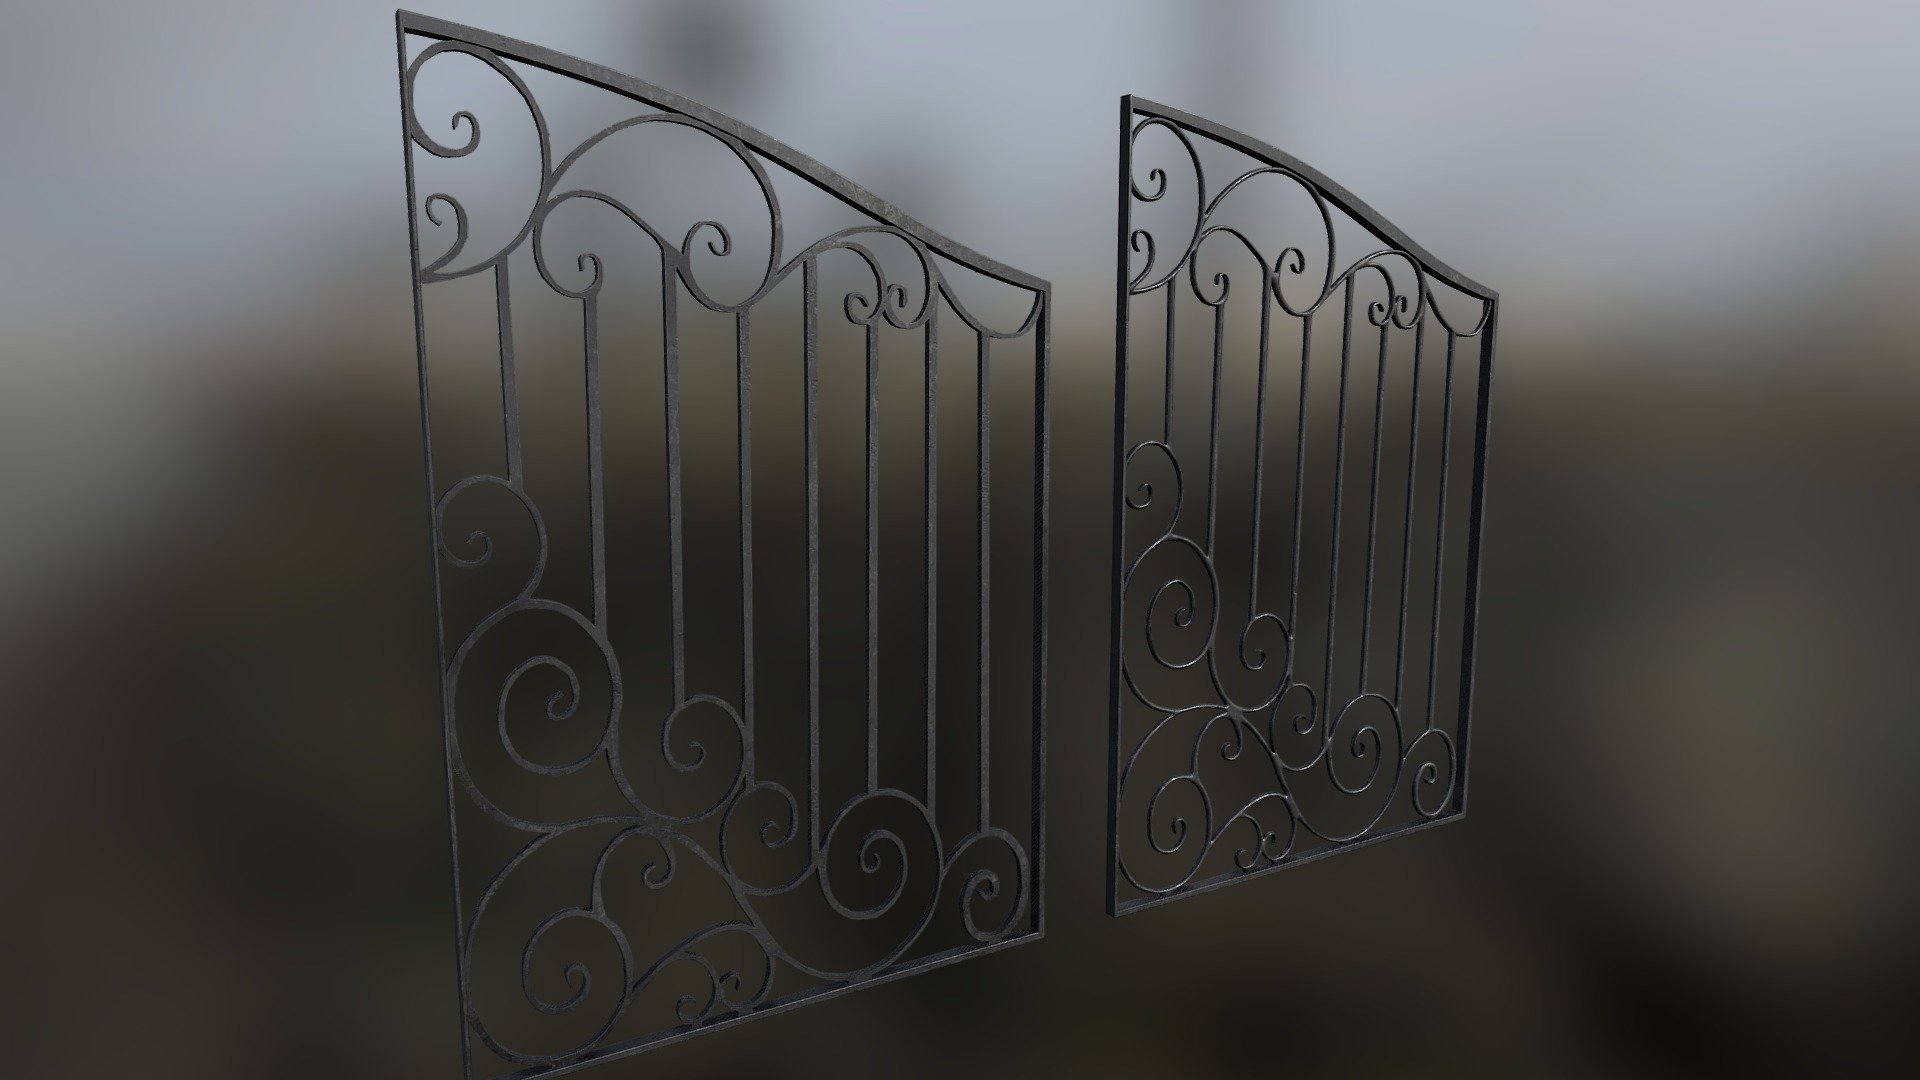 Part of the iron fence that you can use like fence by mirroring it or gate.

Low poly and high poly versions 3d model